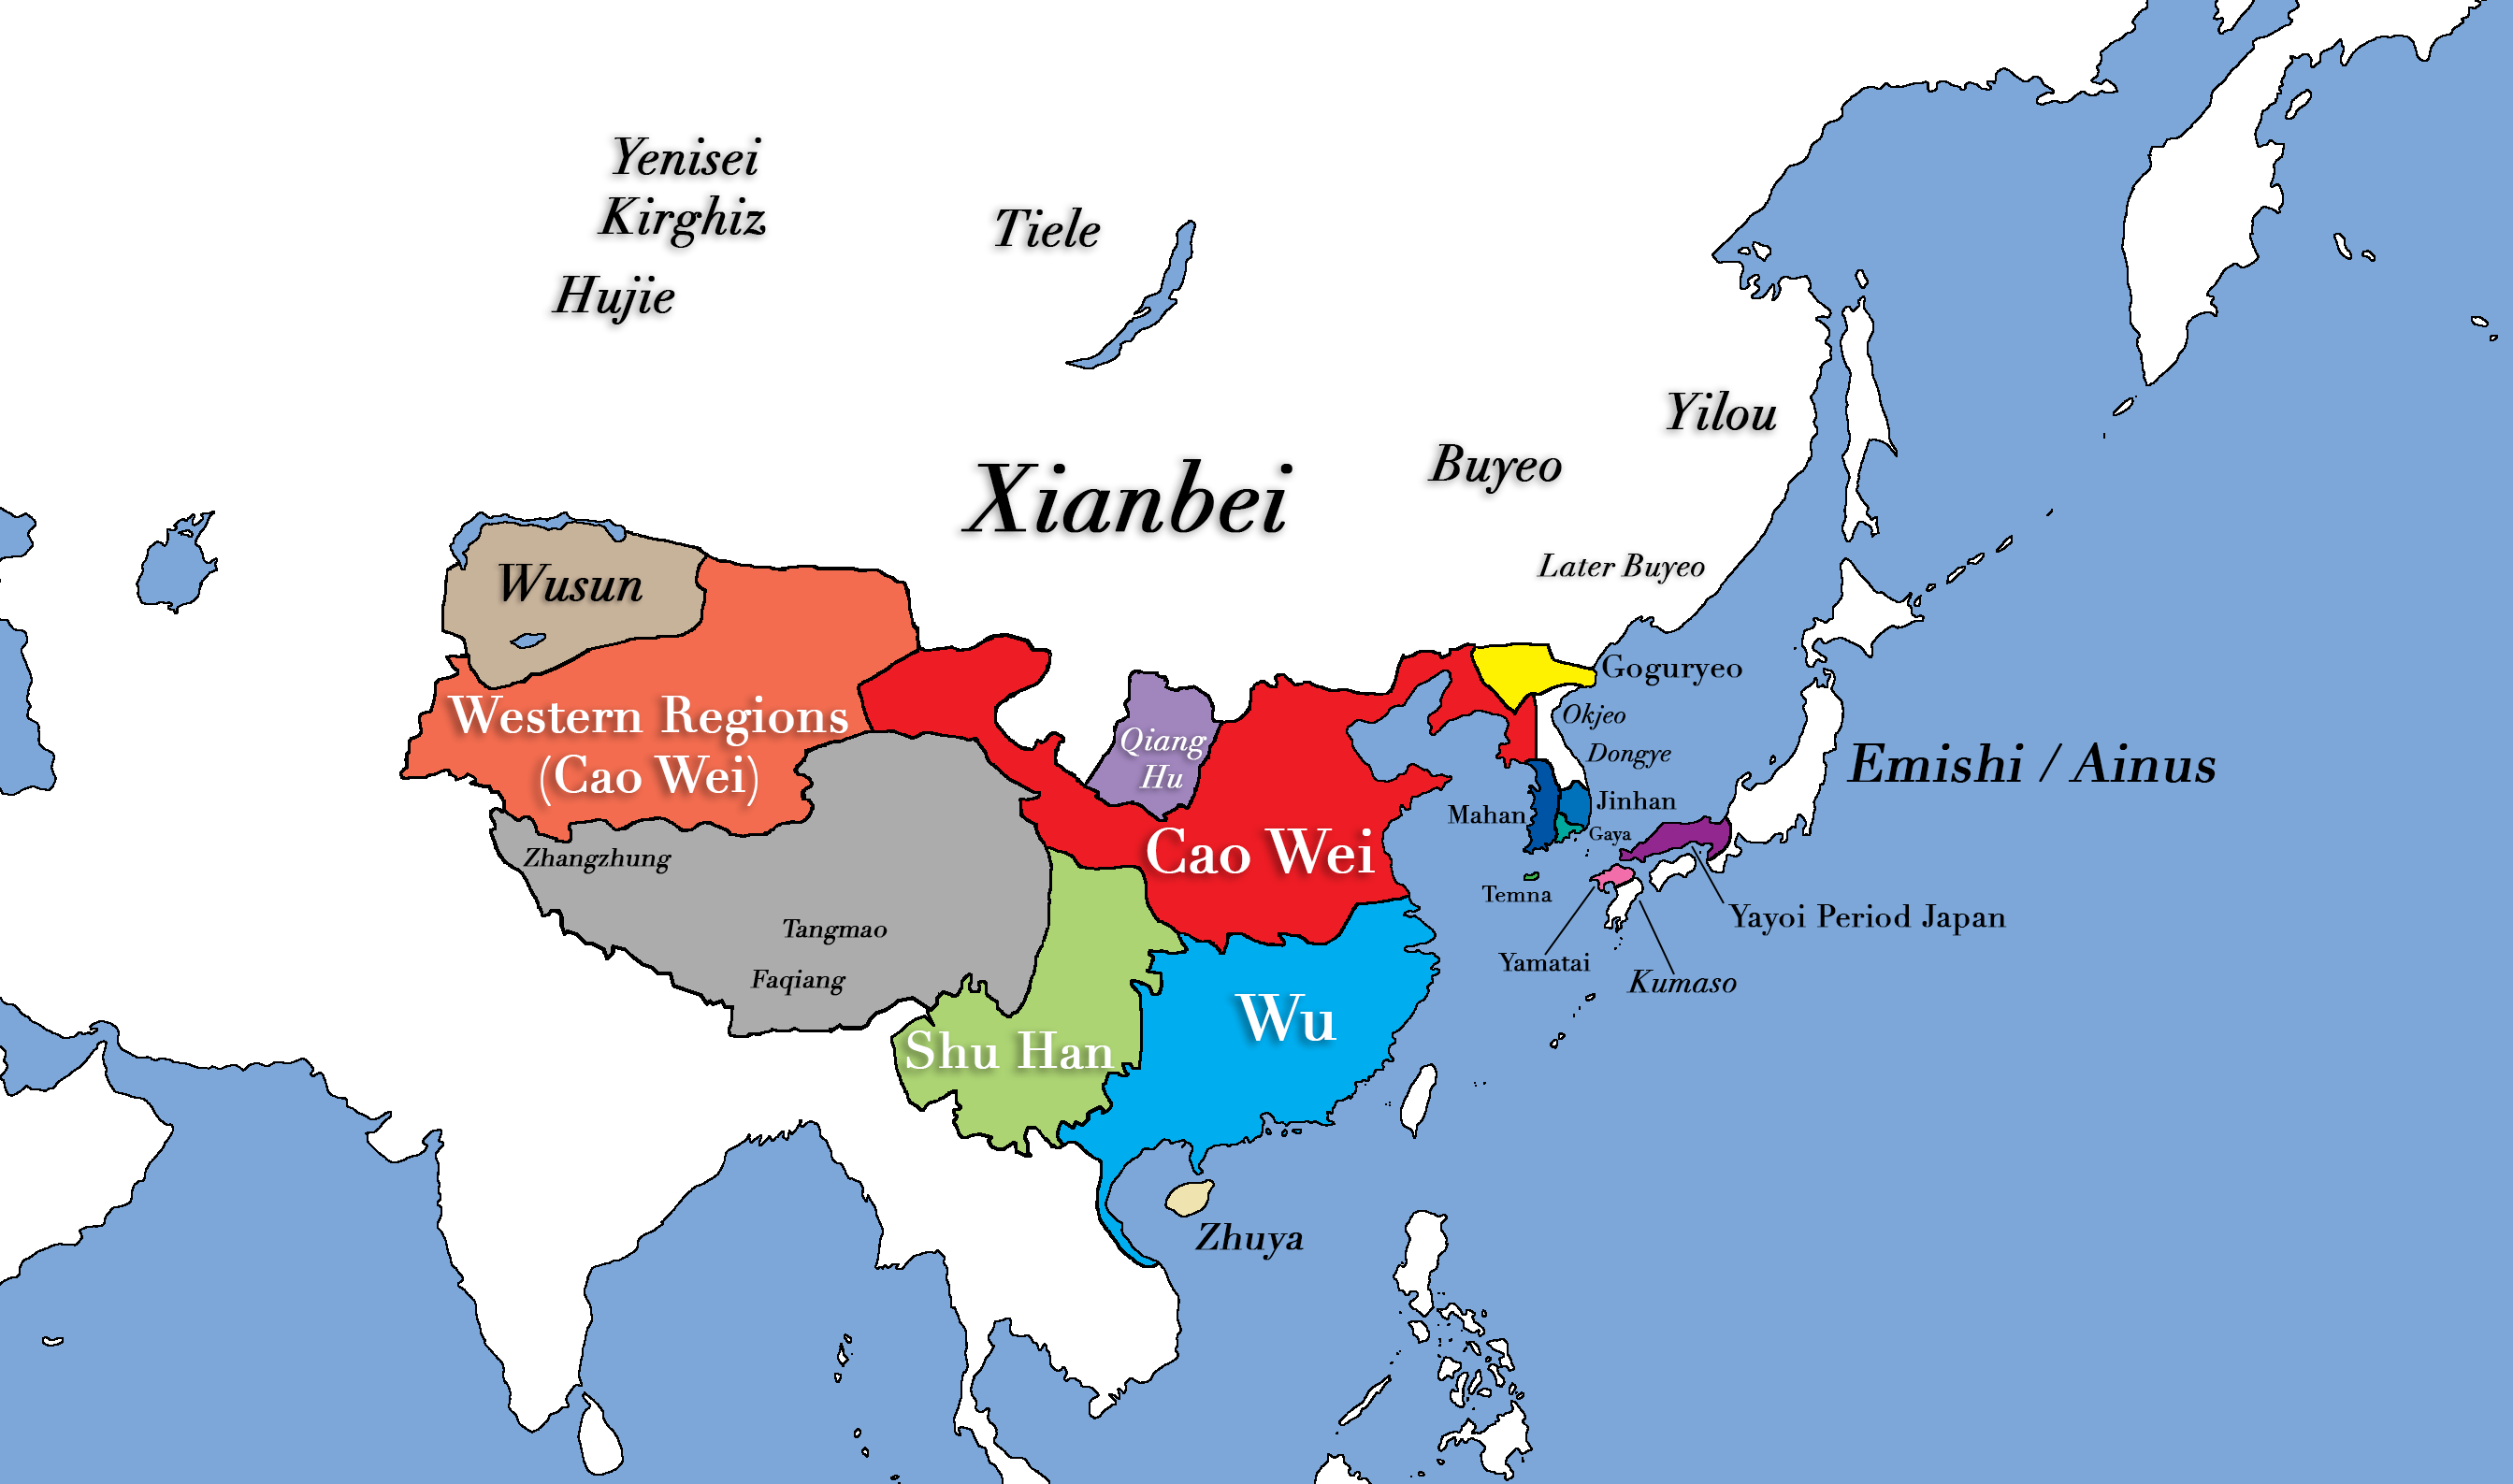 The Untold Conflicts and Stories of the Three Kingdoms Period